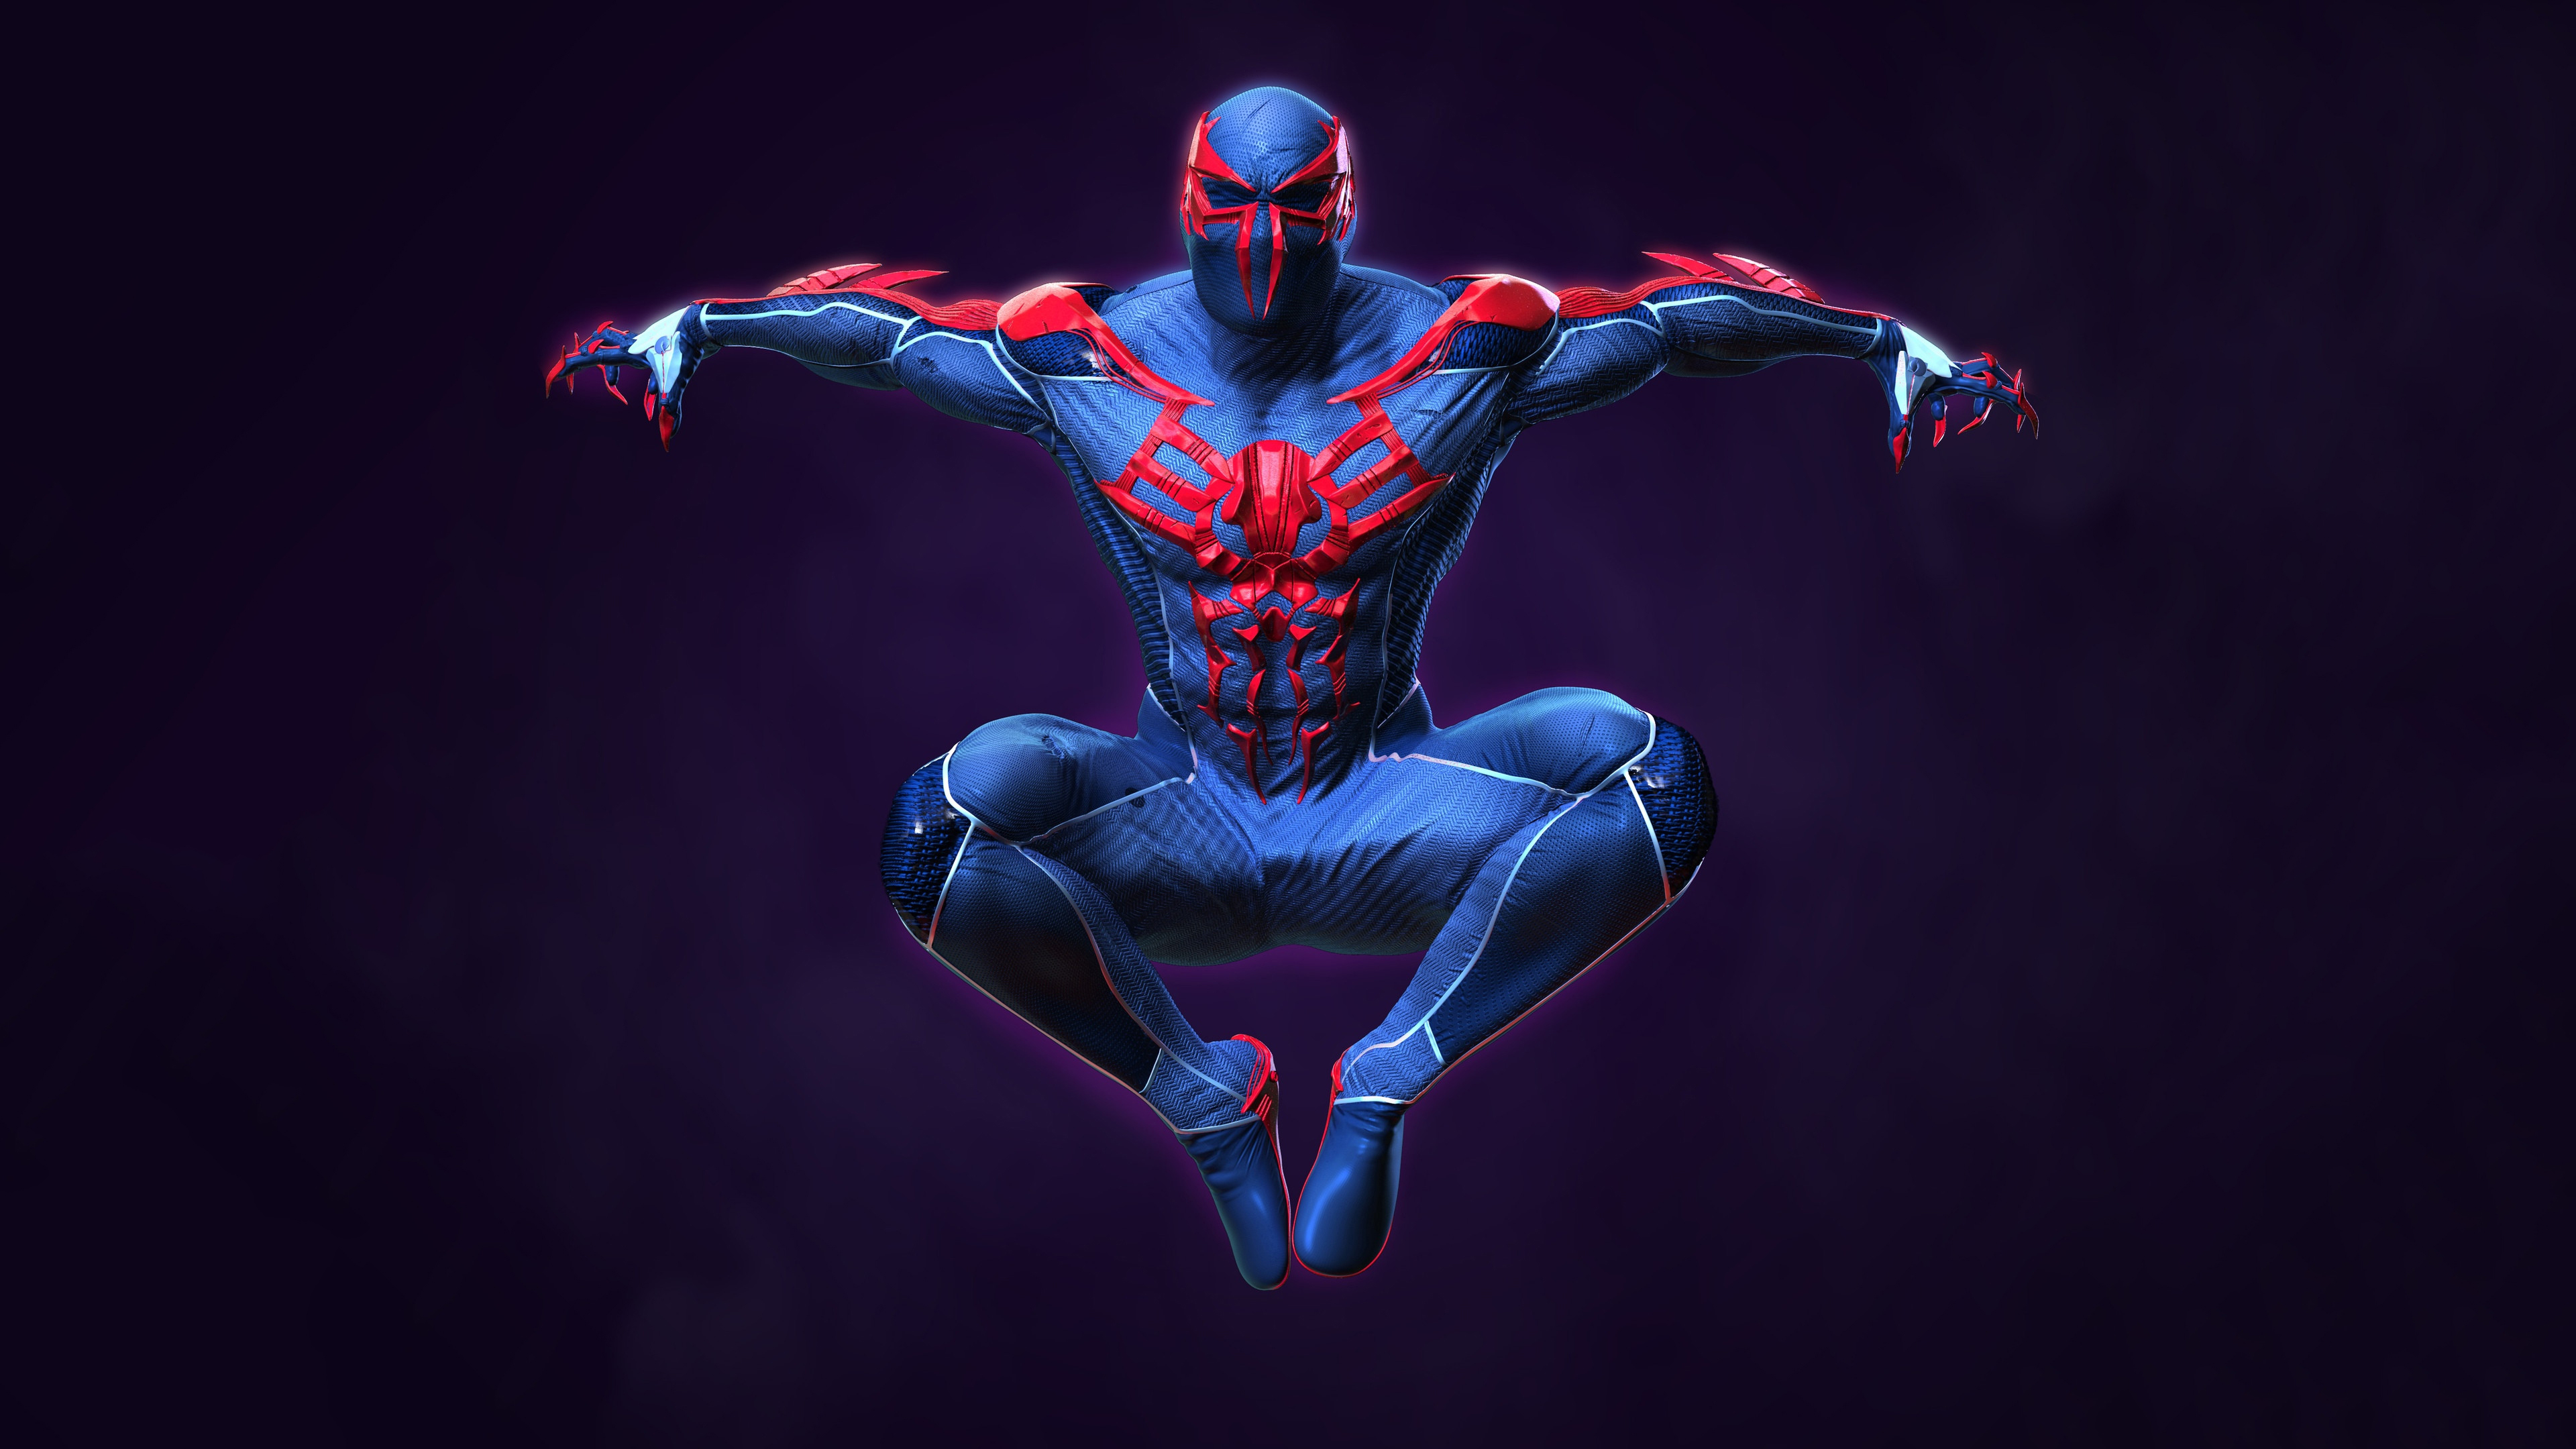 K spider man hd superheroes k wallpapers images backgrounds photos and pictures